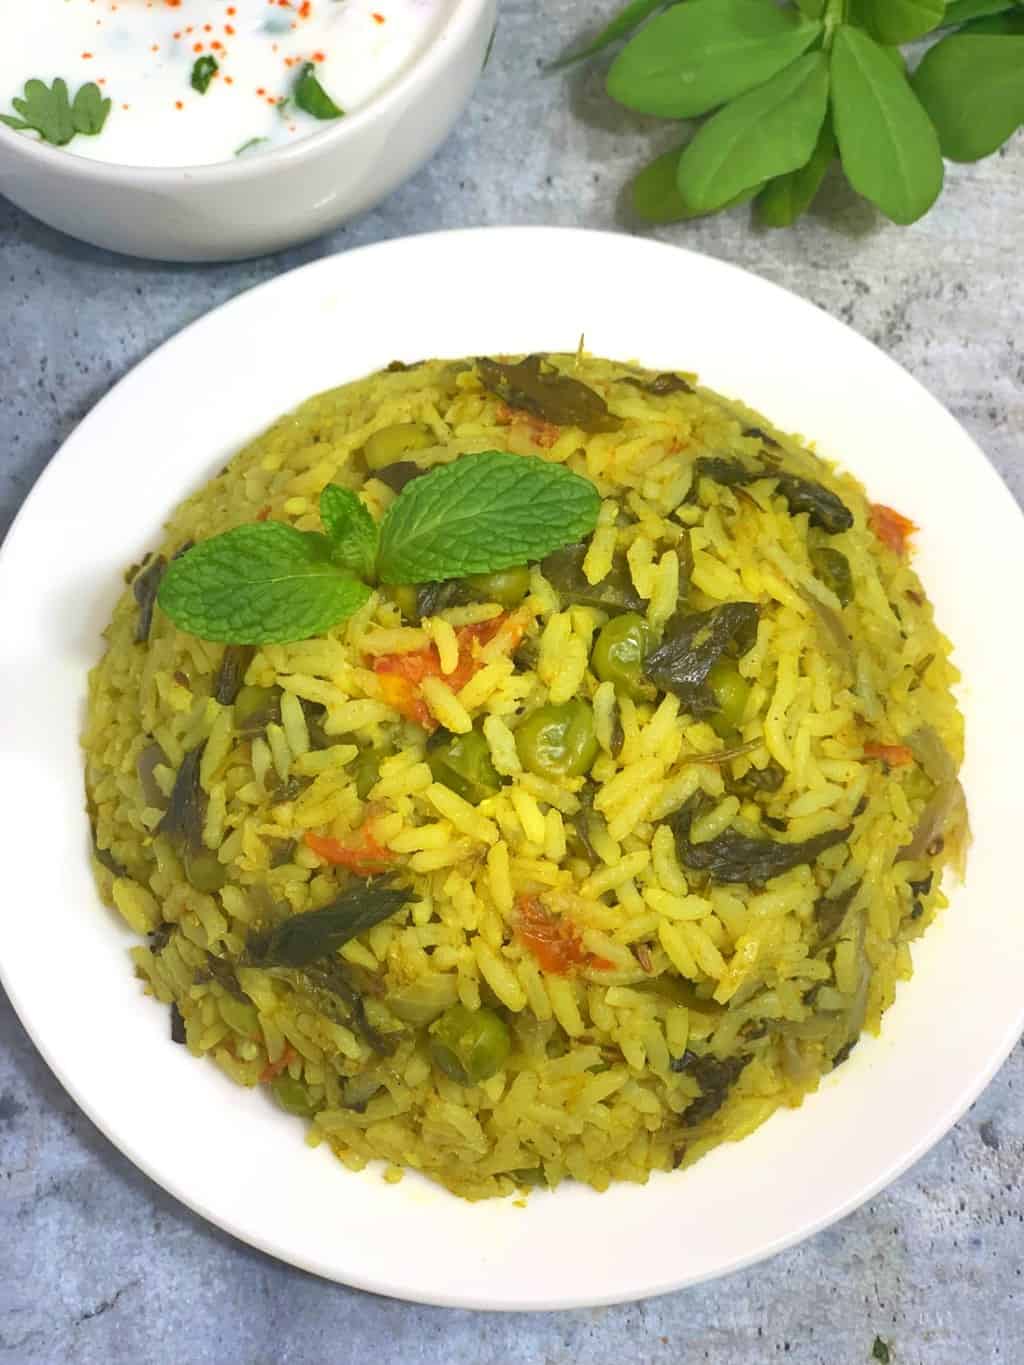 methi rice bath served in a plate garnished with mint leaves with side of raita